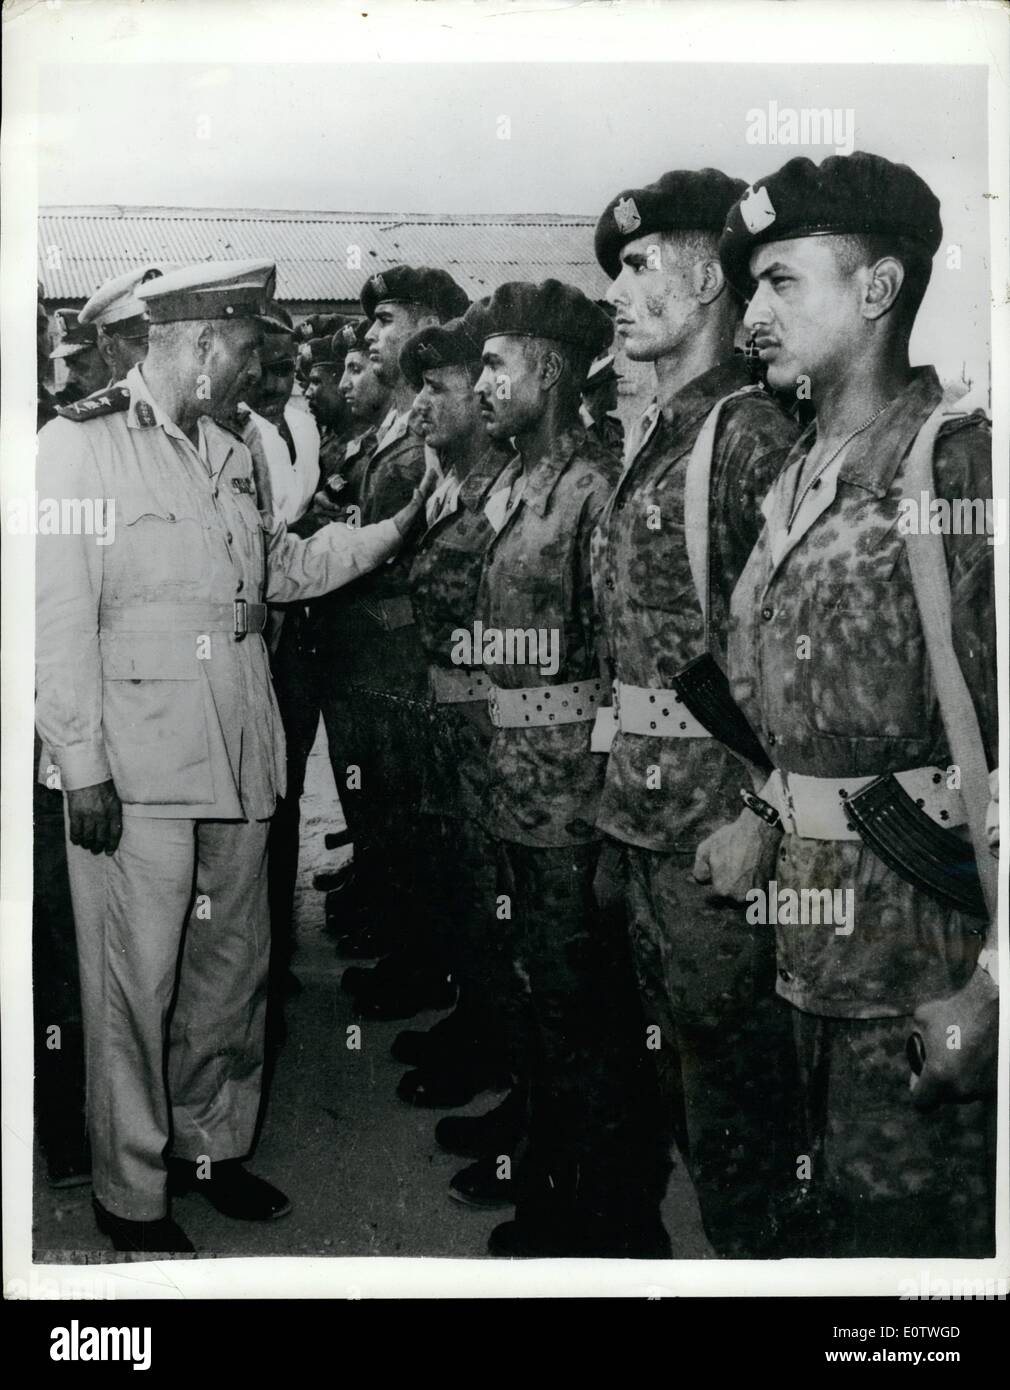 Aug. 08, 1960 - U.A.R. Battalion for the Congo: Lt. Gen. Mohamed Farid Salama, Deputy Chief of Staff of the Armed Forces, recently inspected men of the United Arab Republic battalion, which was due to leave for the Congo to join the United Nations Forces there. The battalion is part of the Paratroop Bridge and is made up of officers and men of both regions of the U.A.R. Photo shows Lt. Gen. Mohamed Farid Salama inspecting members of the U.A.R. prior to their departure for the Congo. in Cairo recently. Stock Photo